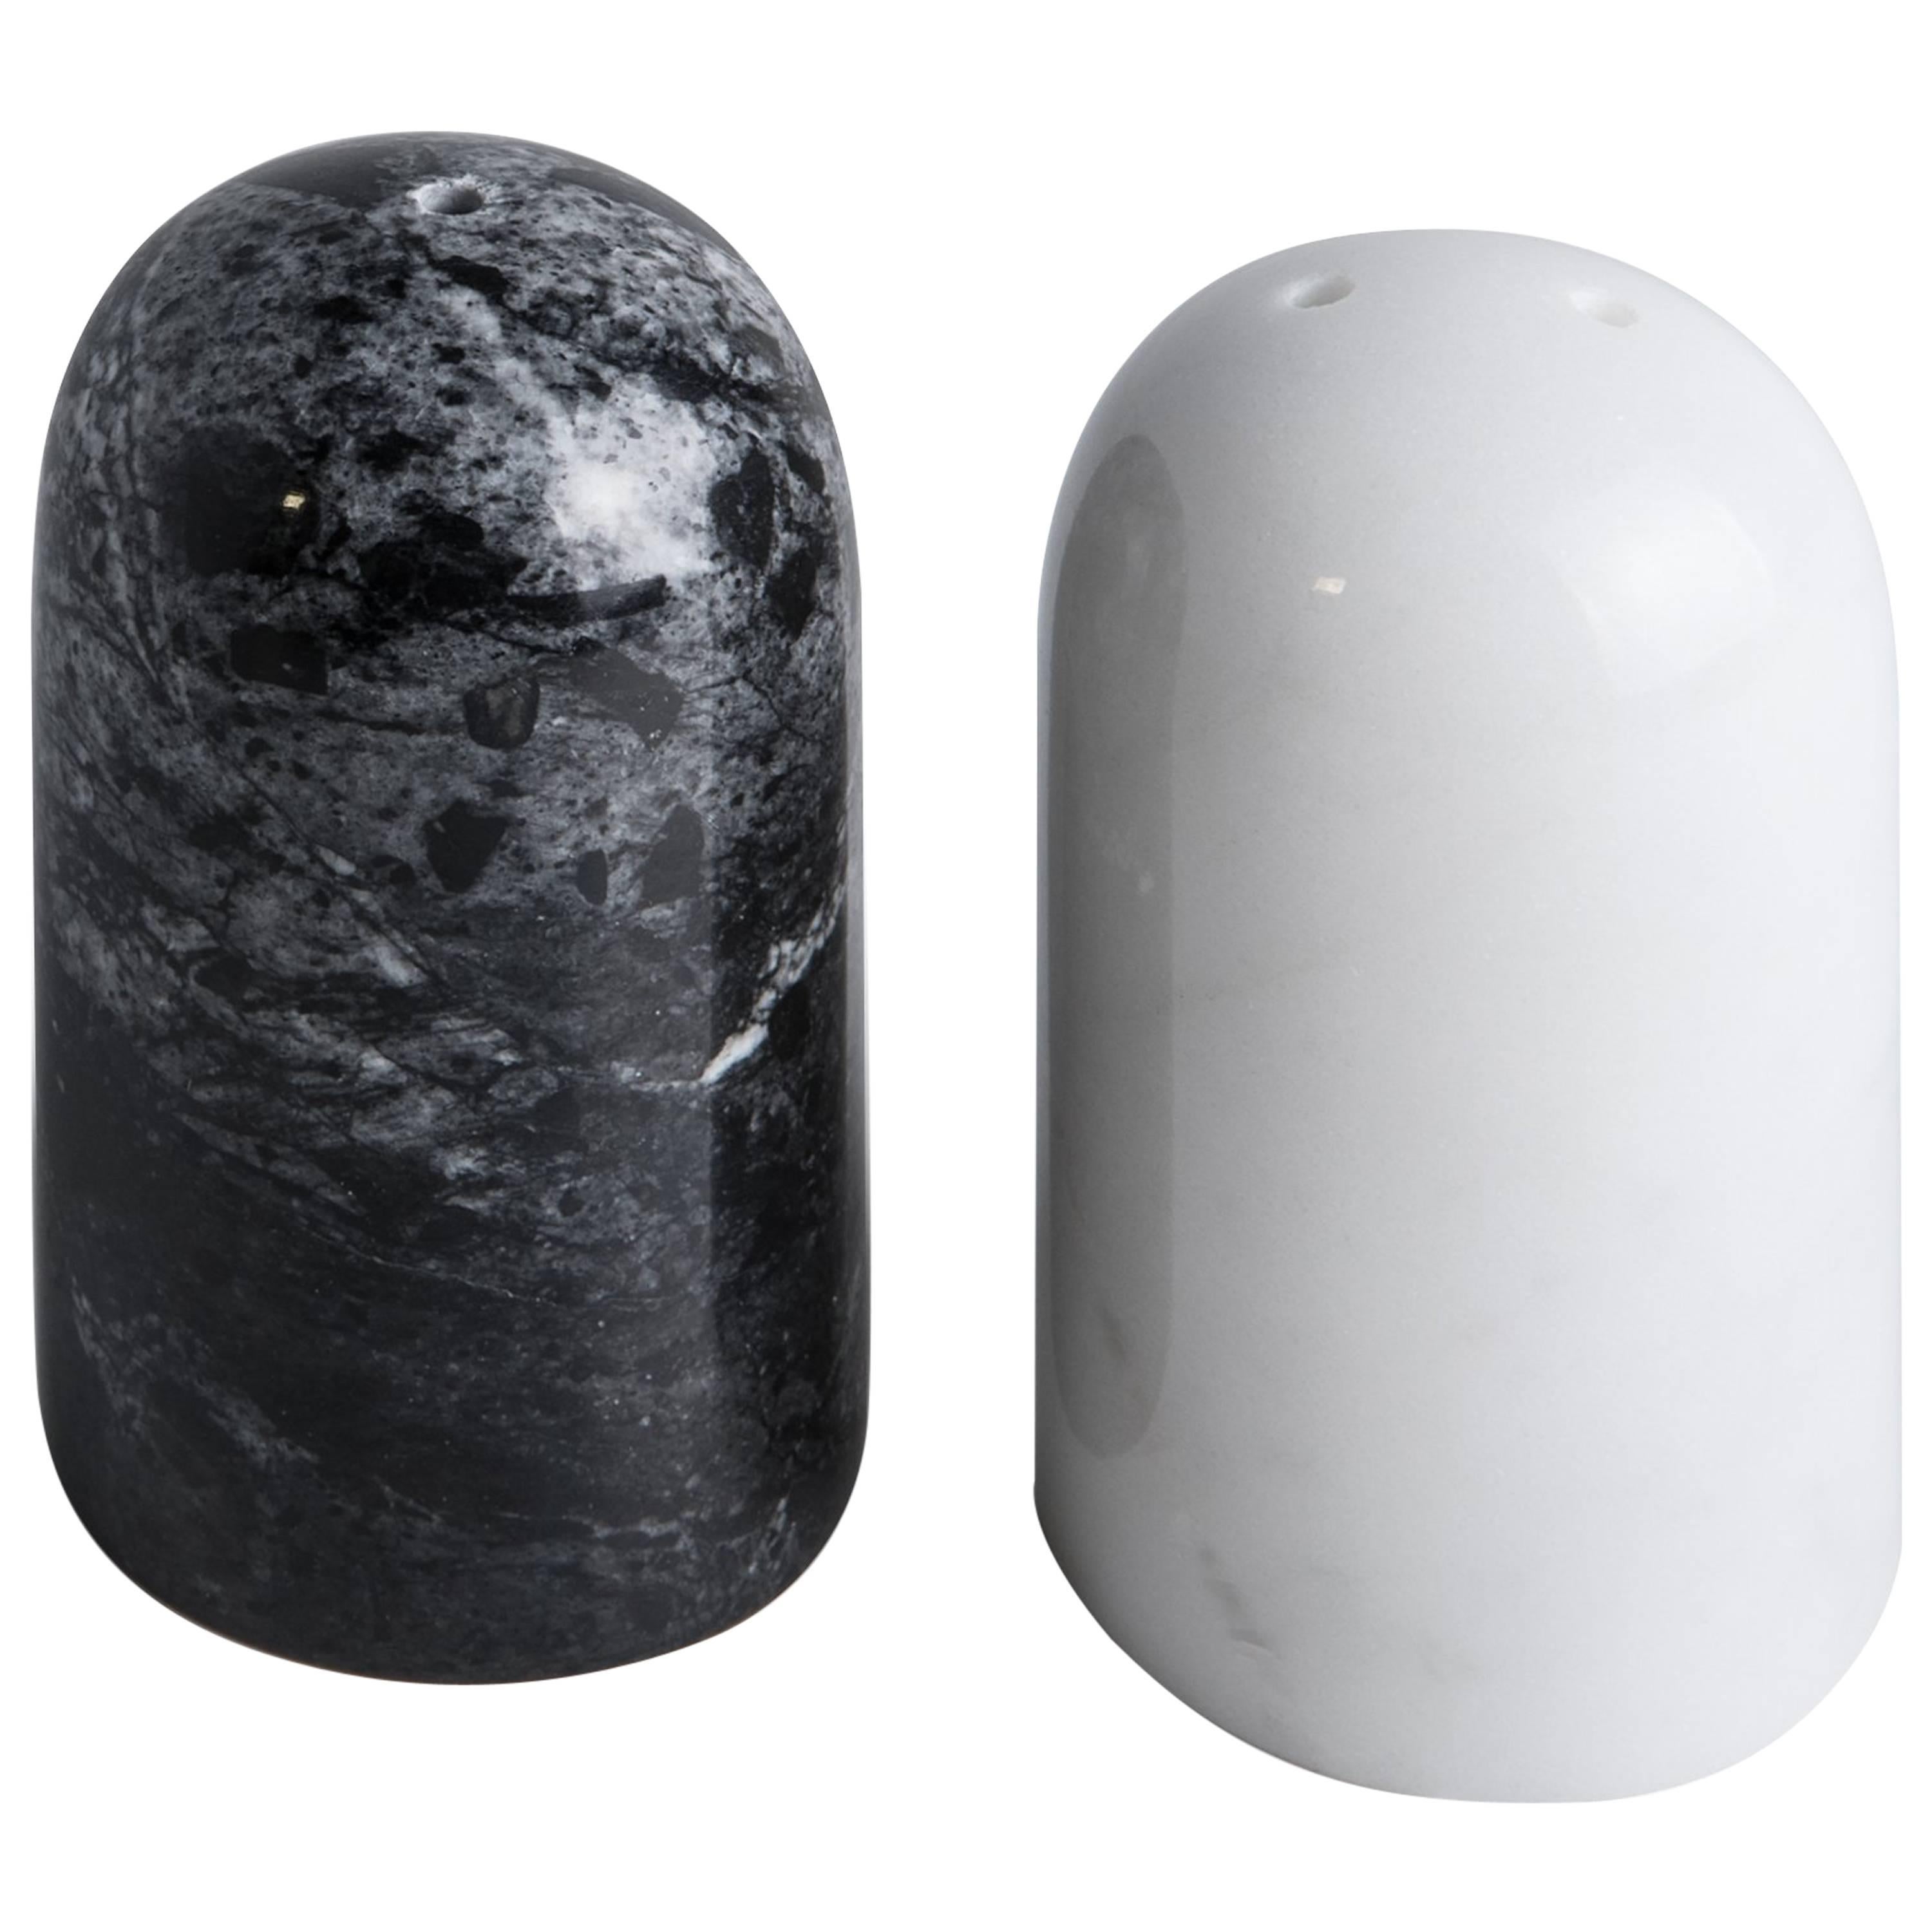 Black and White Rounded Salt and Pepper Set